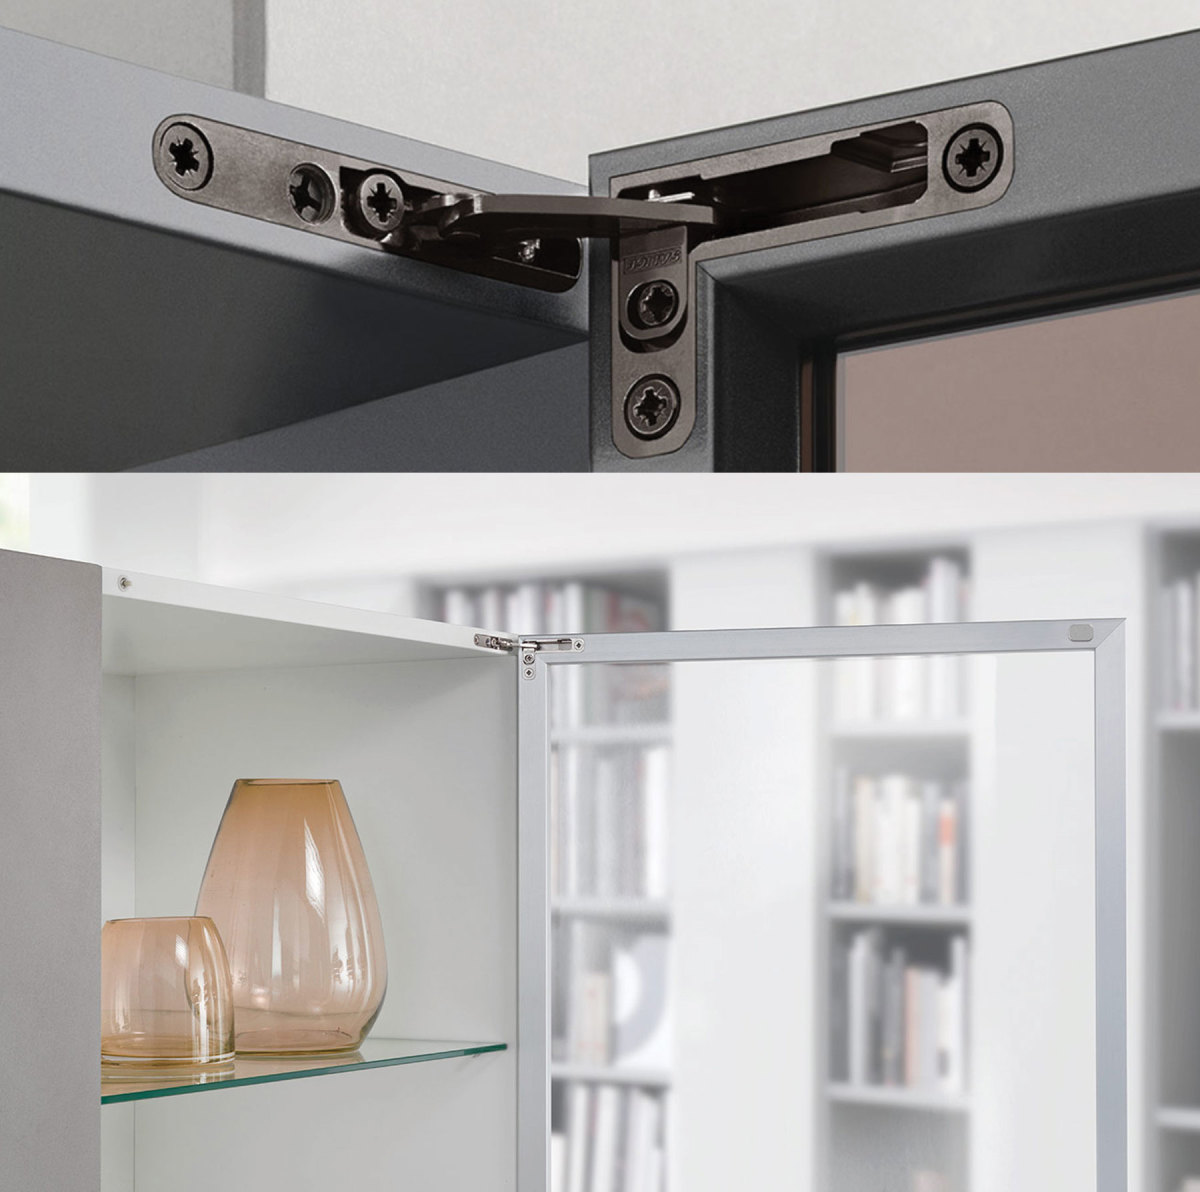 The Air Push concealed
hinge from Salice America.